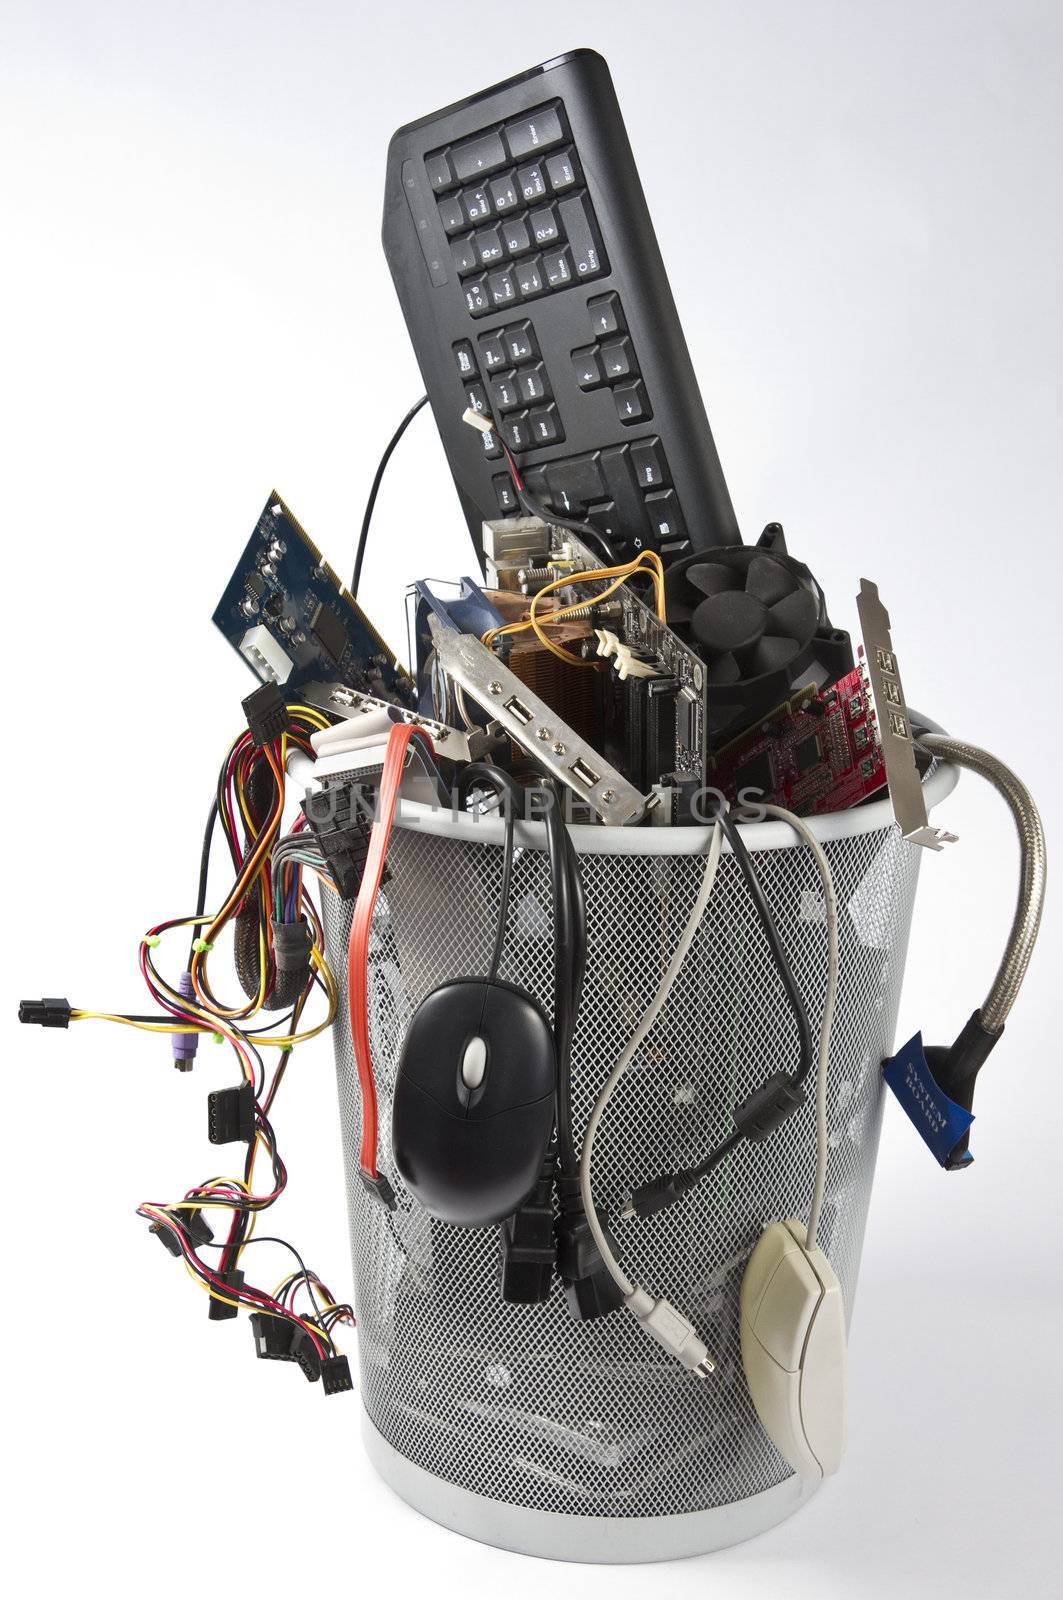 trashcan in grey background with many computer parts